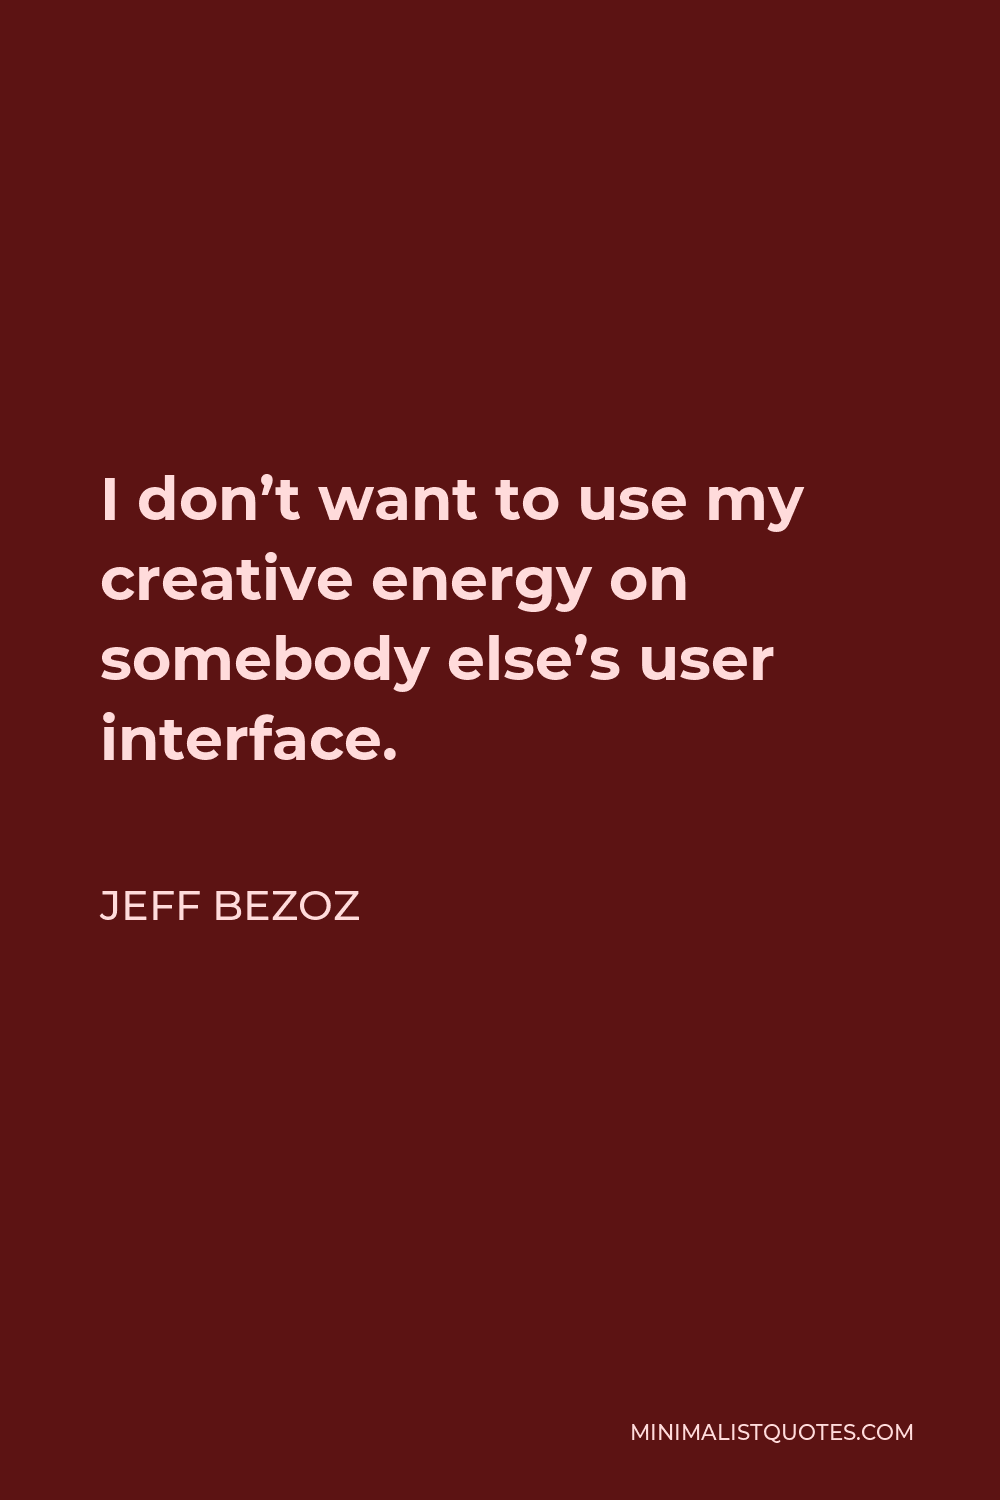 Jeff Bezoz Quote - I don’t want to use my creative energy on somebody else’s user interface.